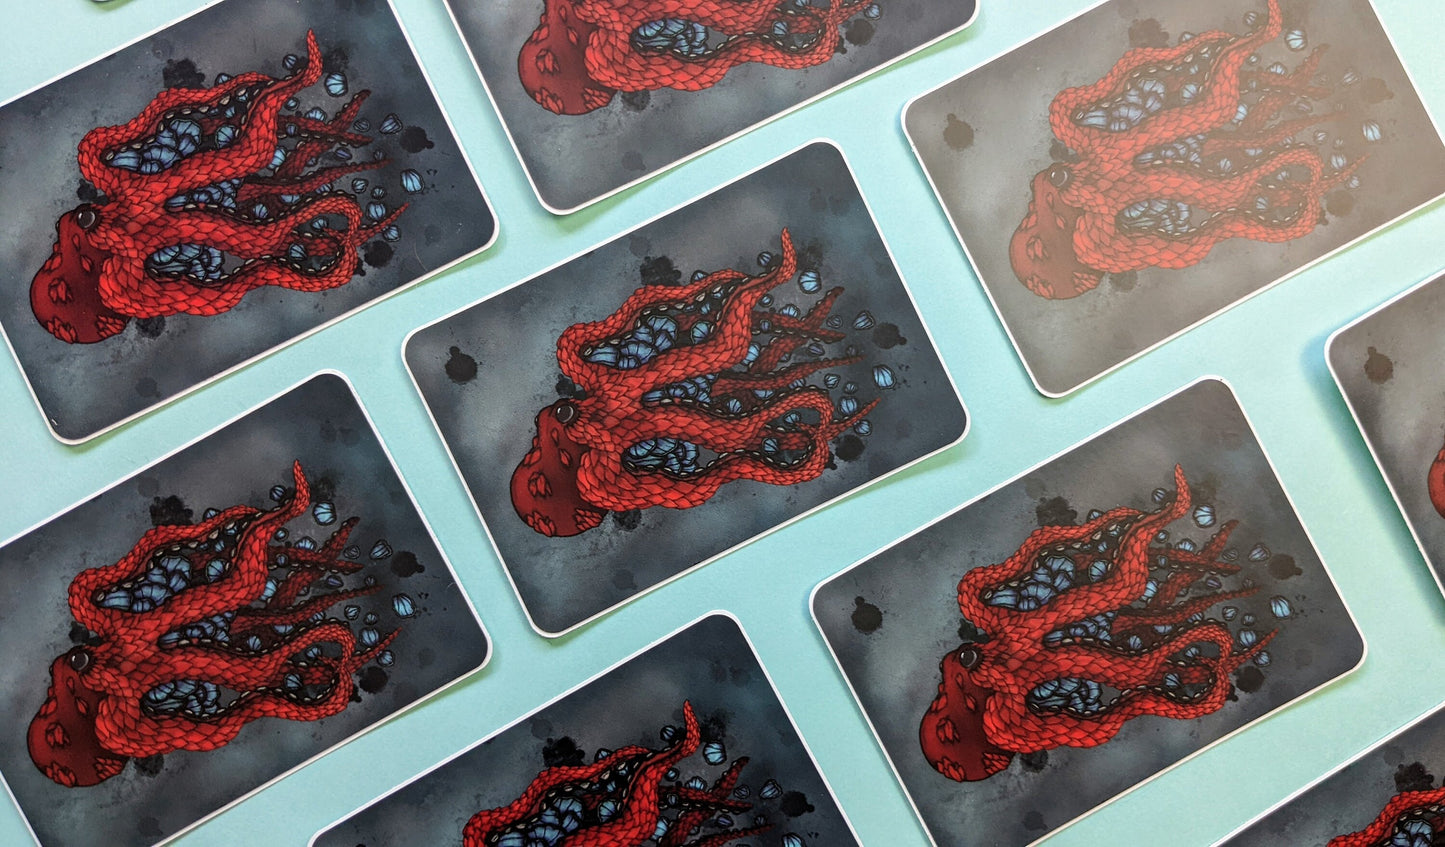 Red Octopus (The Collector) Sticker